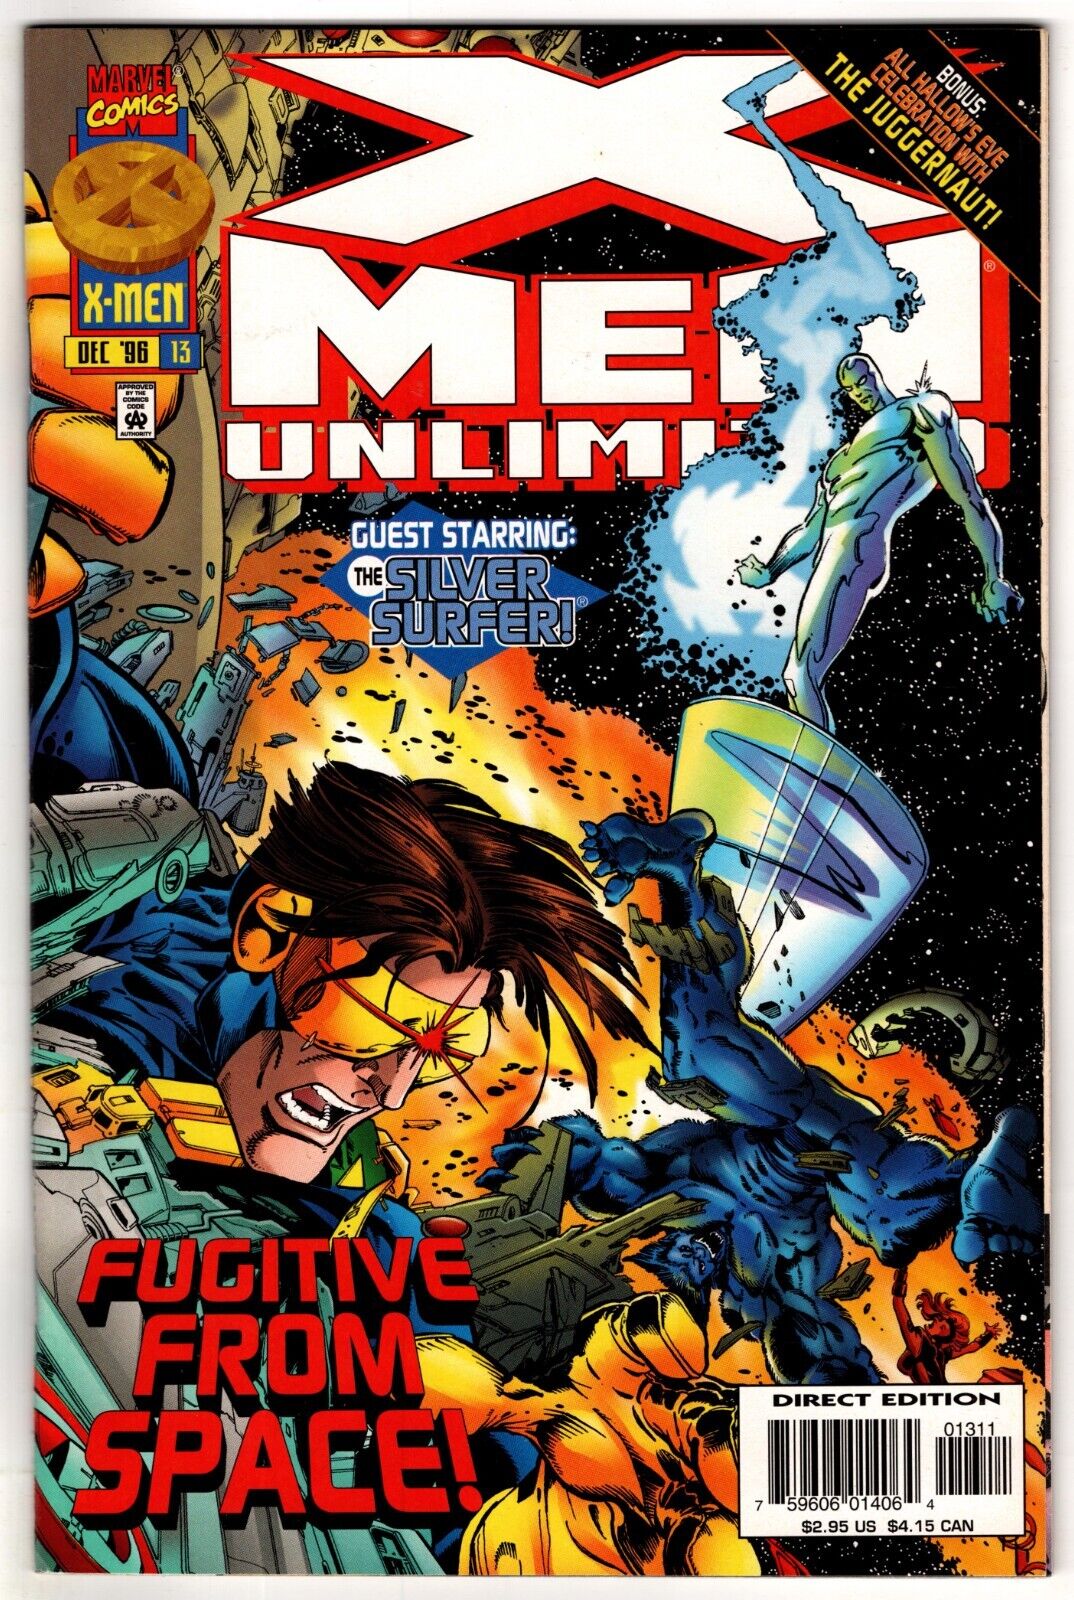 X-Men Unlimited #13 - Fugitive From Space